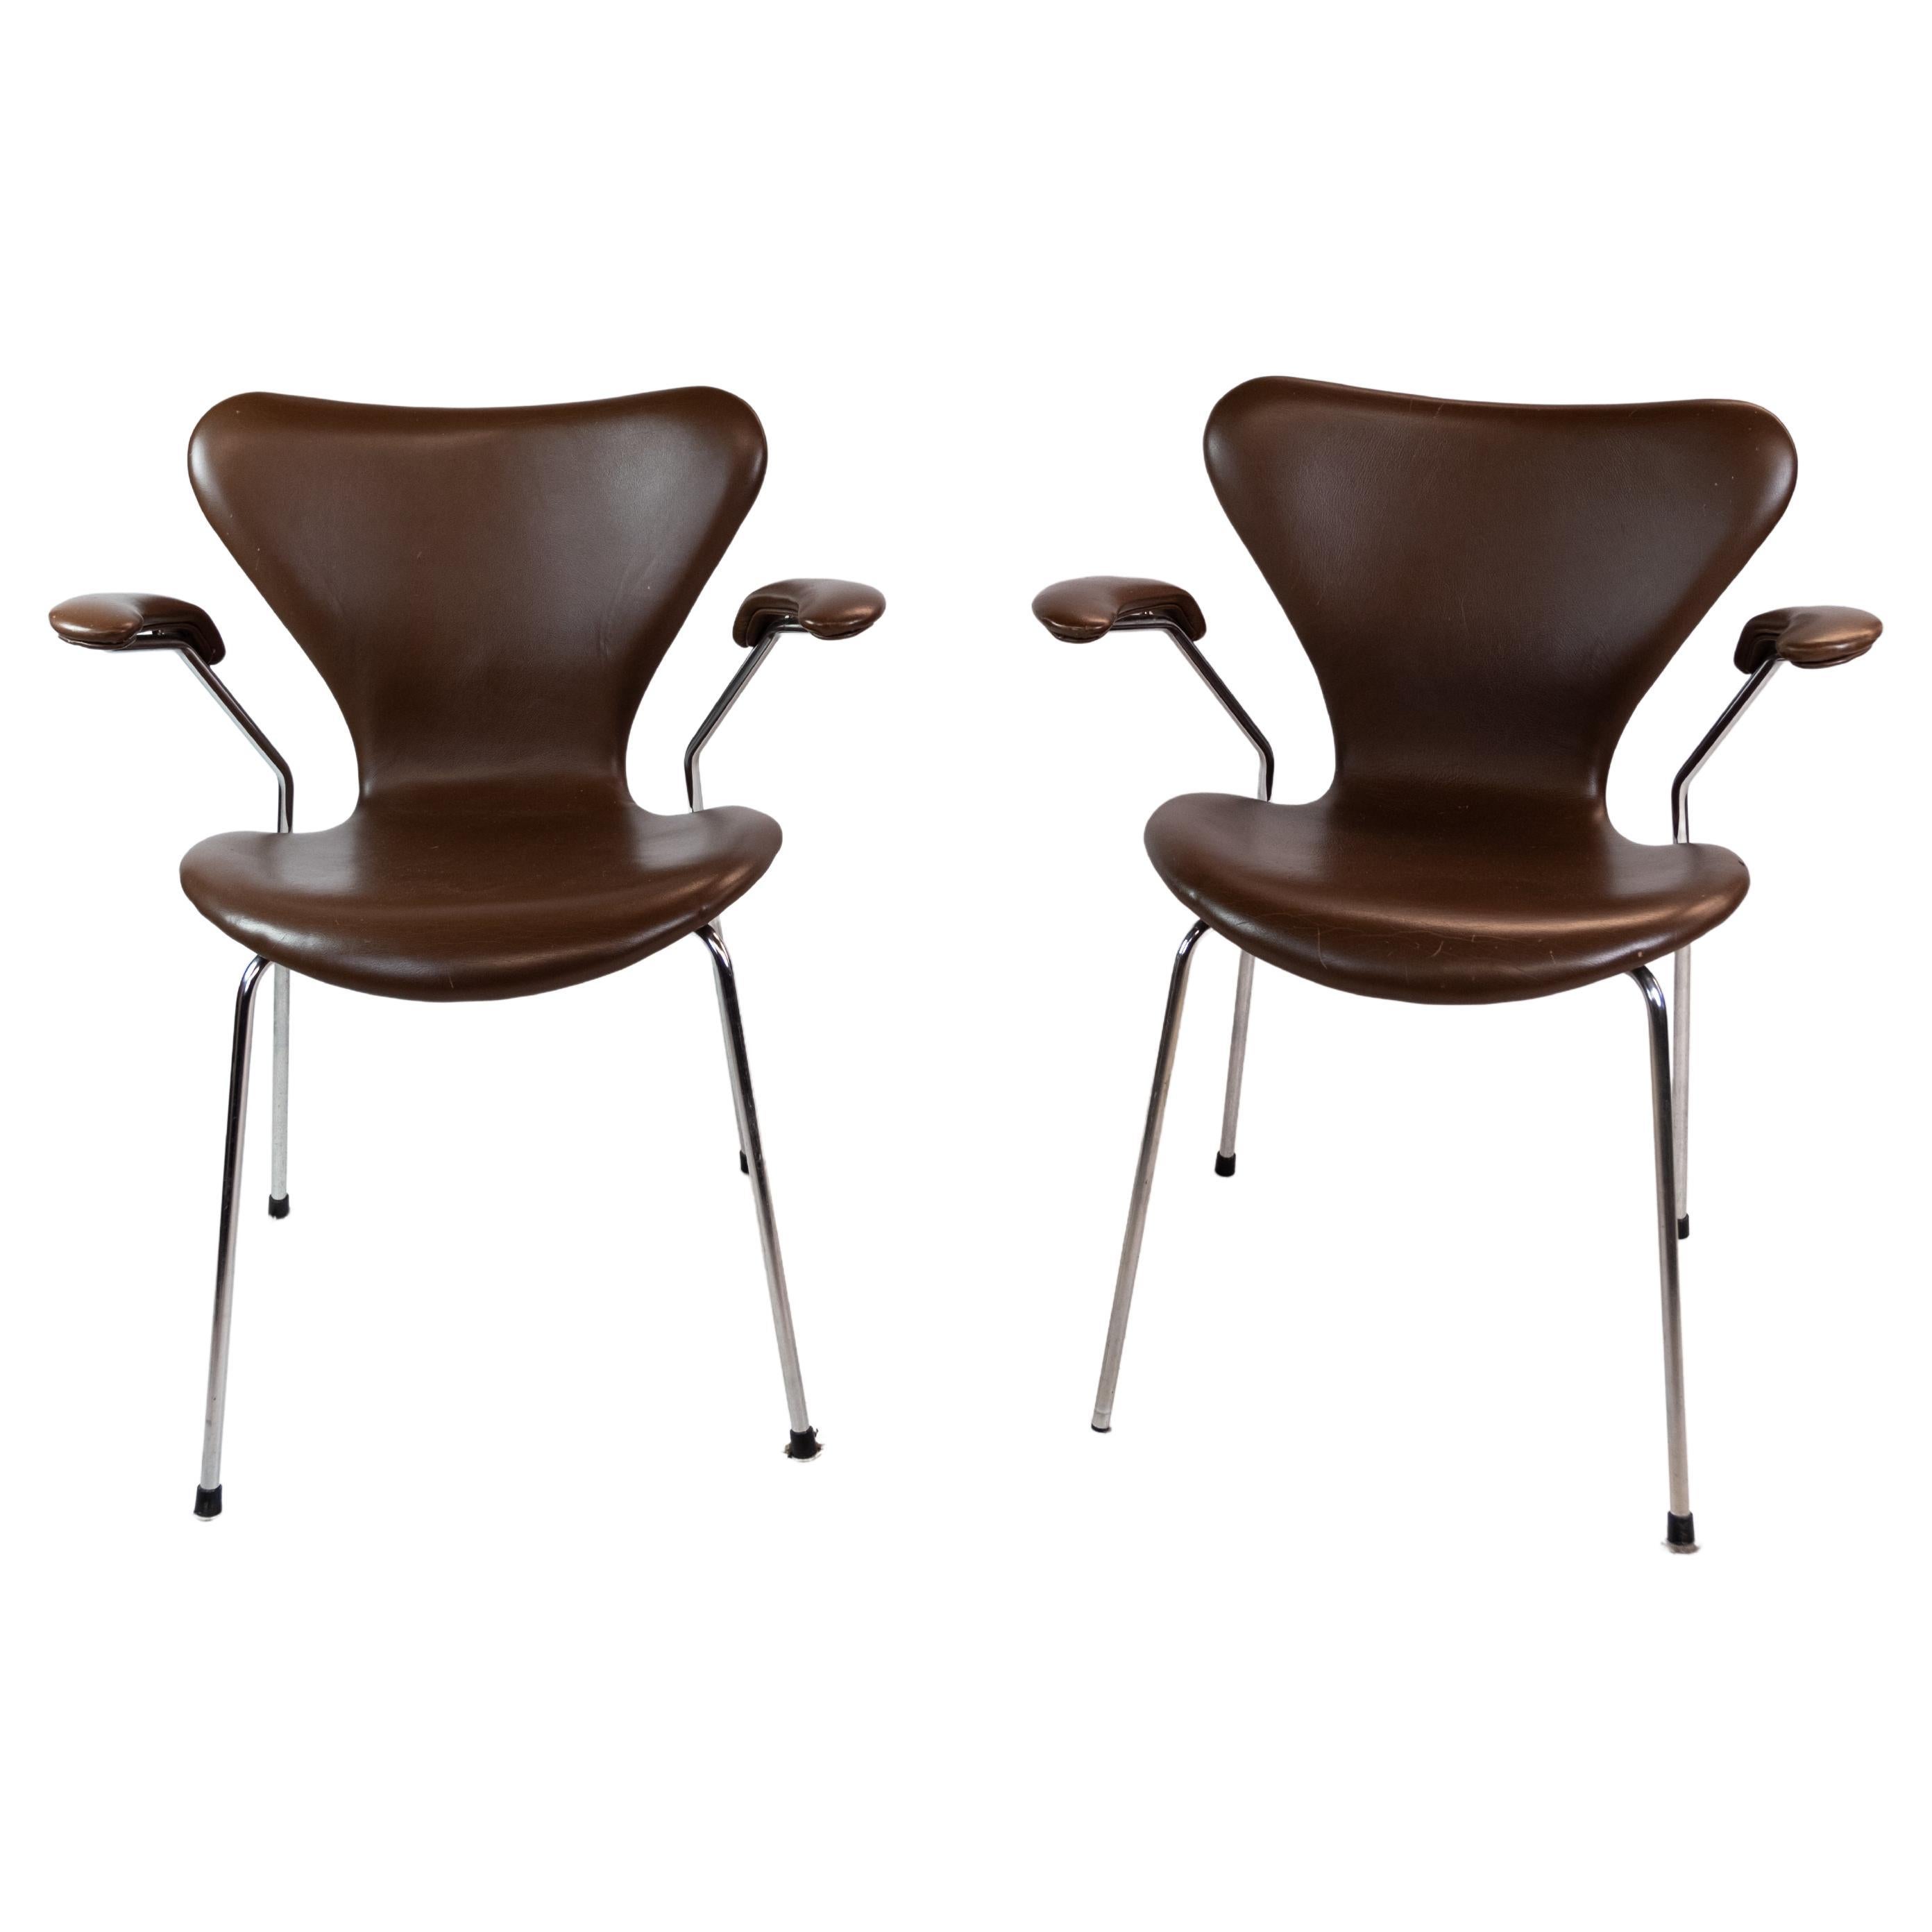 Set of Two Seven Chairs, Model 3207, Dark Brown Leather, Arne Jacobsen, 1955